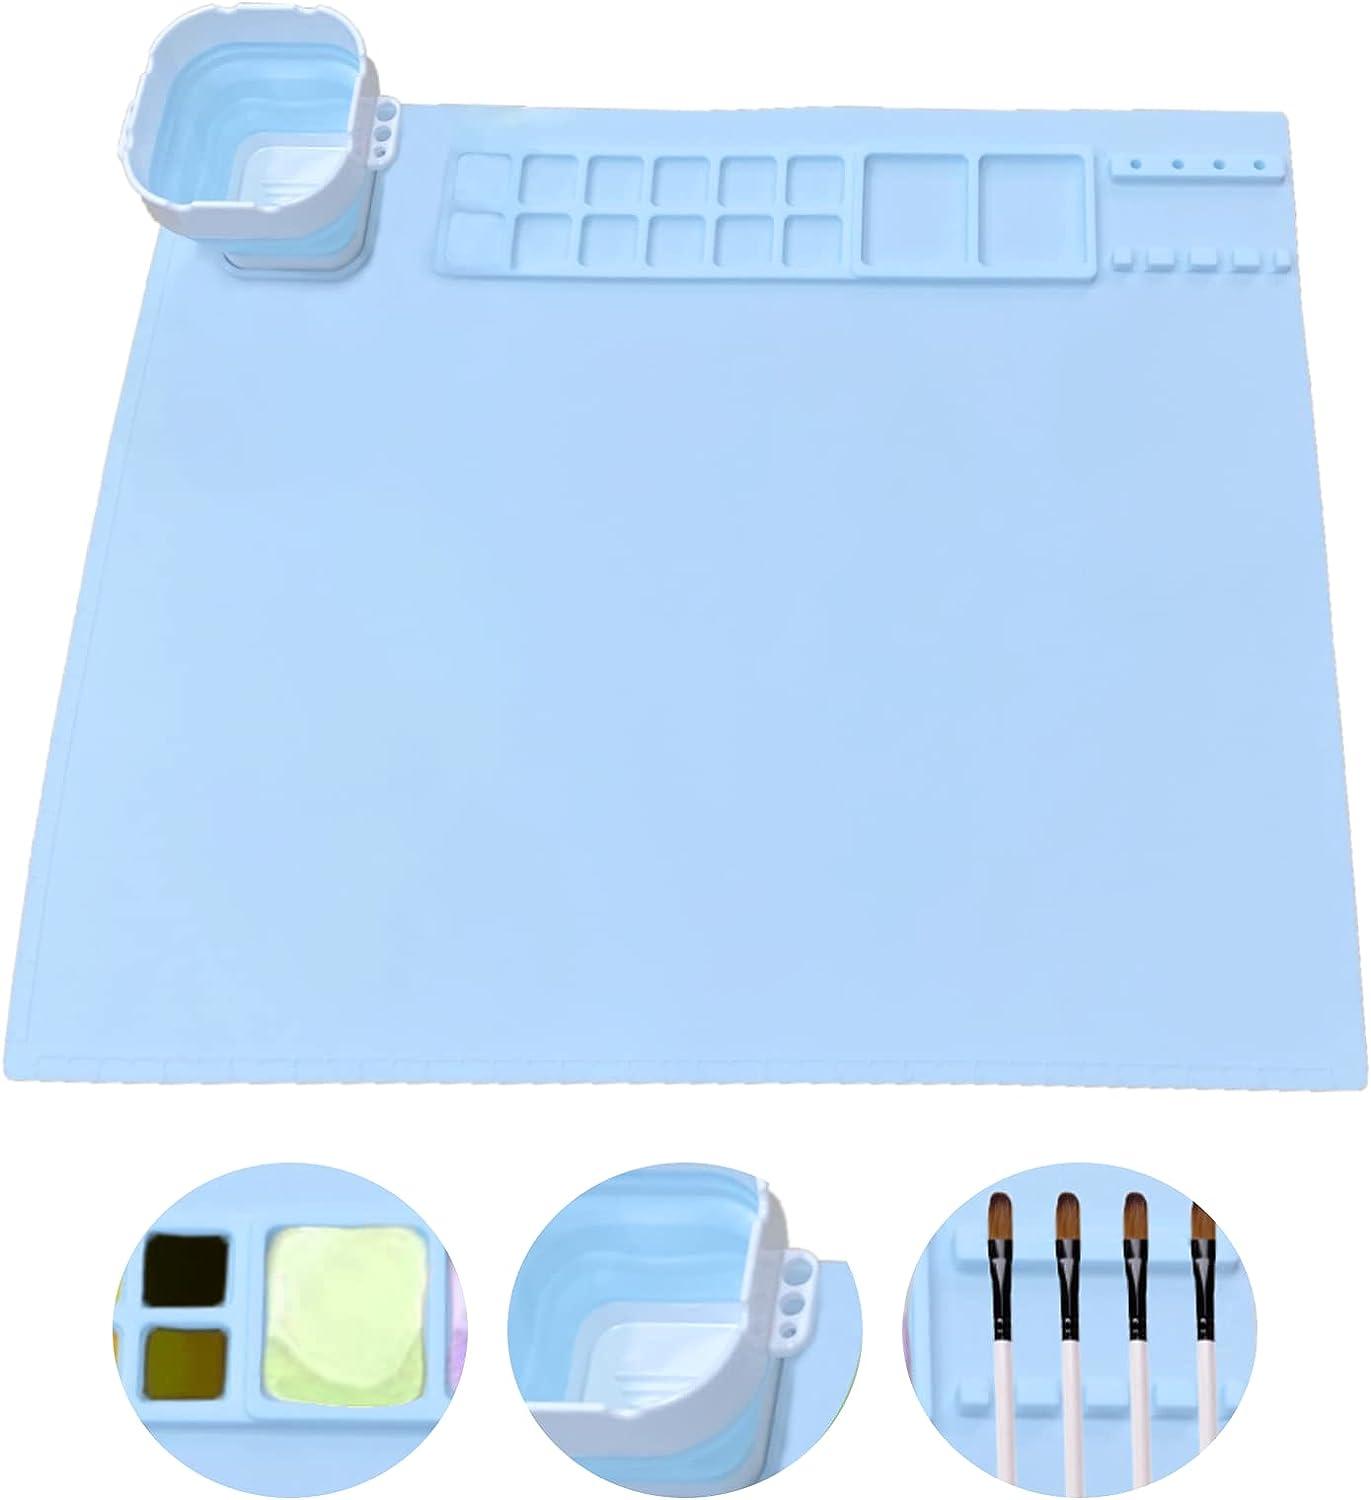 Silicone Craft Mat - Silicone Mat for Resin Casting, Stick Silicone Sheet,  Silicone Painting Art Mat with Cleaning Cup for Painting, Art, Clay, Craft